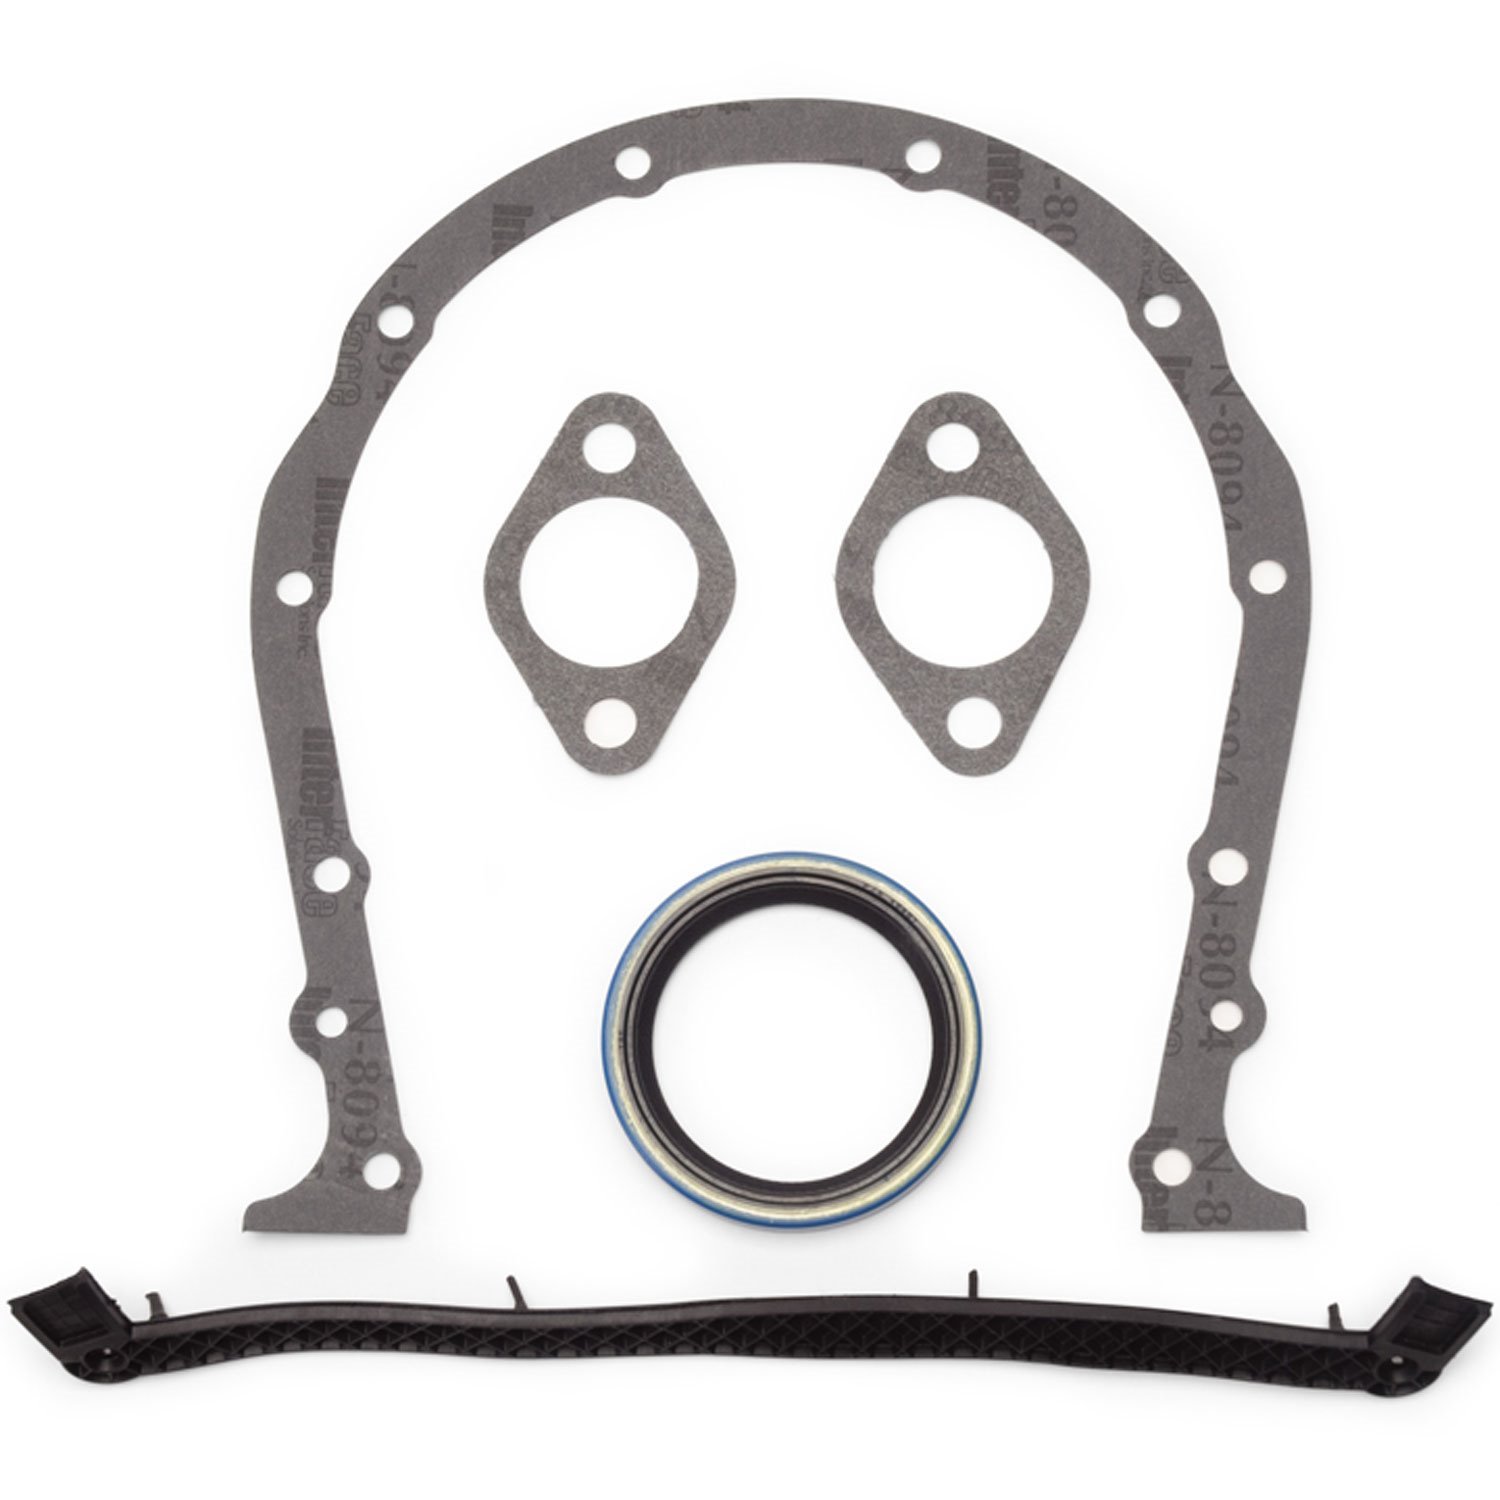 Timing Cover Gasket and Seal for Big Block Chevy